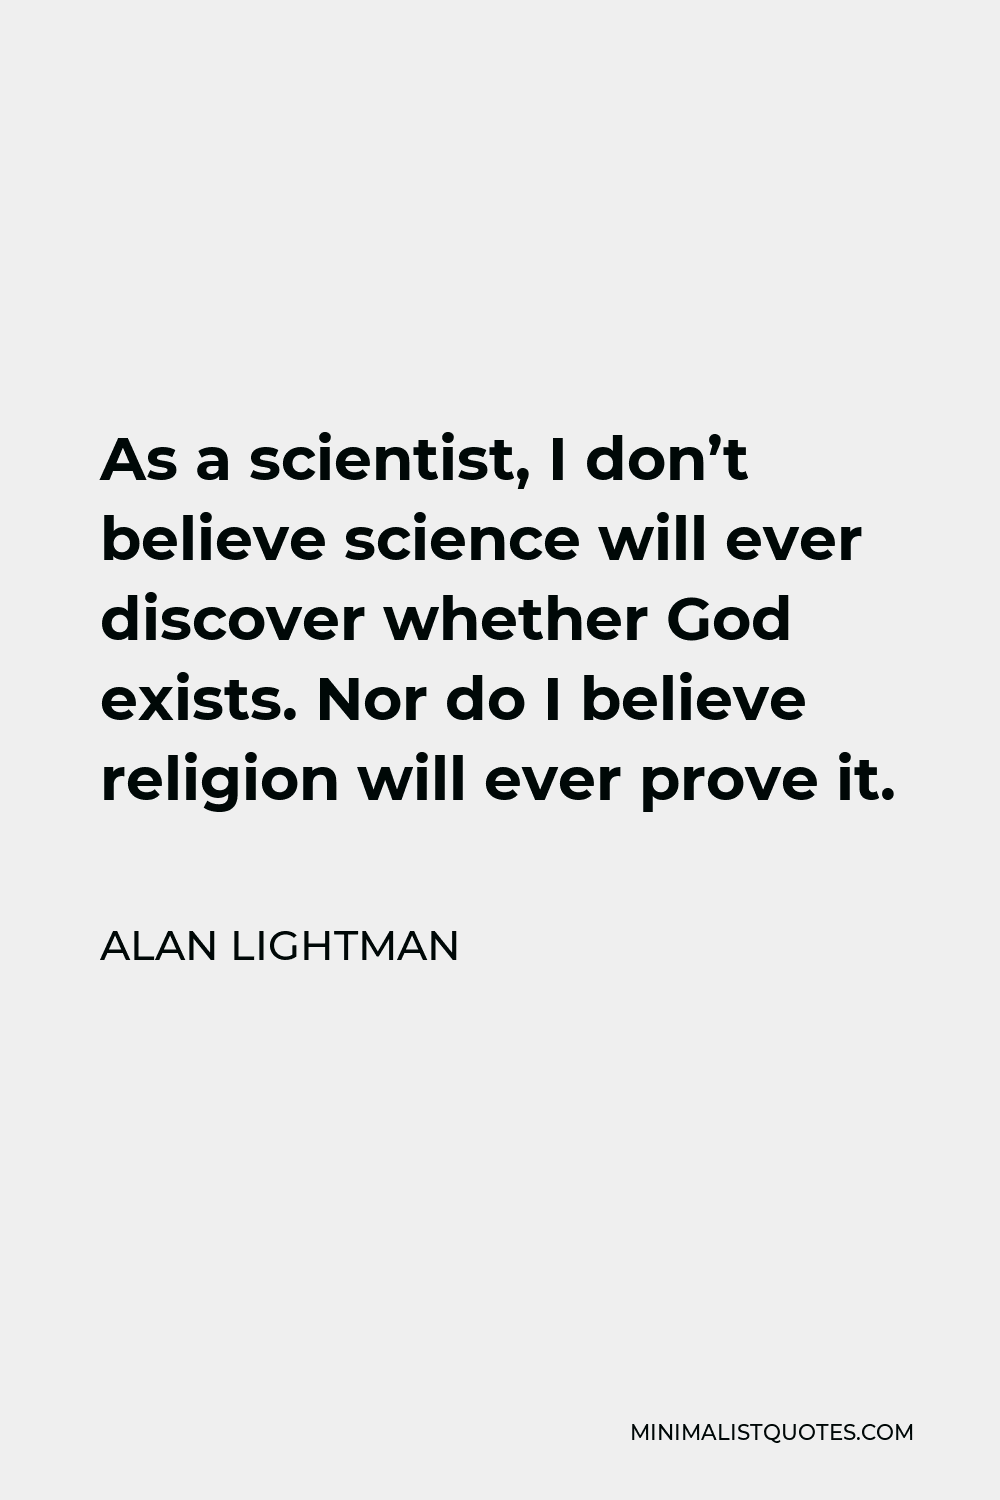 Alan Lightman Quote - As a scientist, I don’t believe science will ever discover whether God exists. Nor do I believe religion will ever prove it.